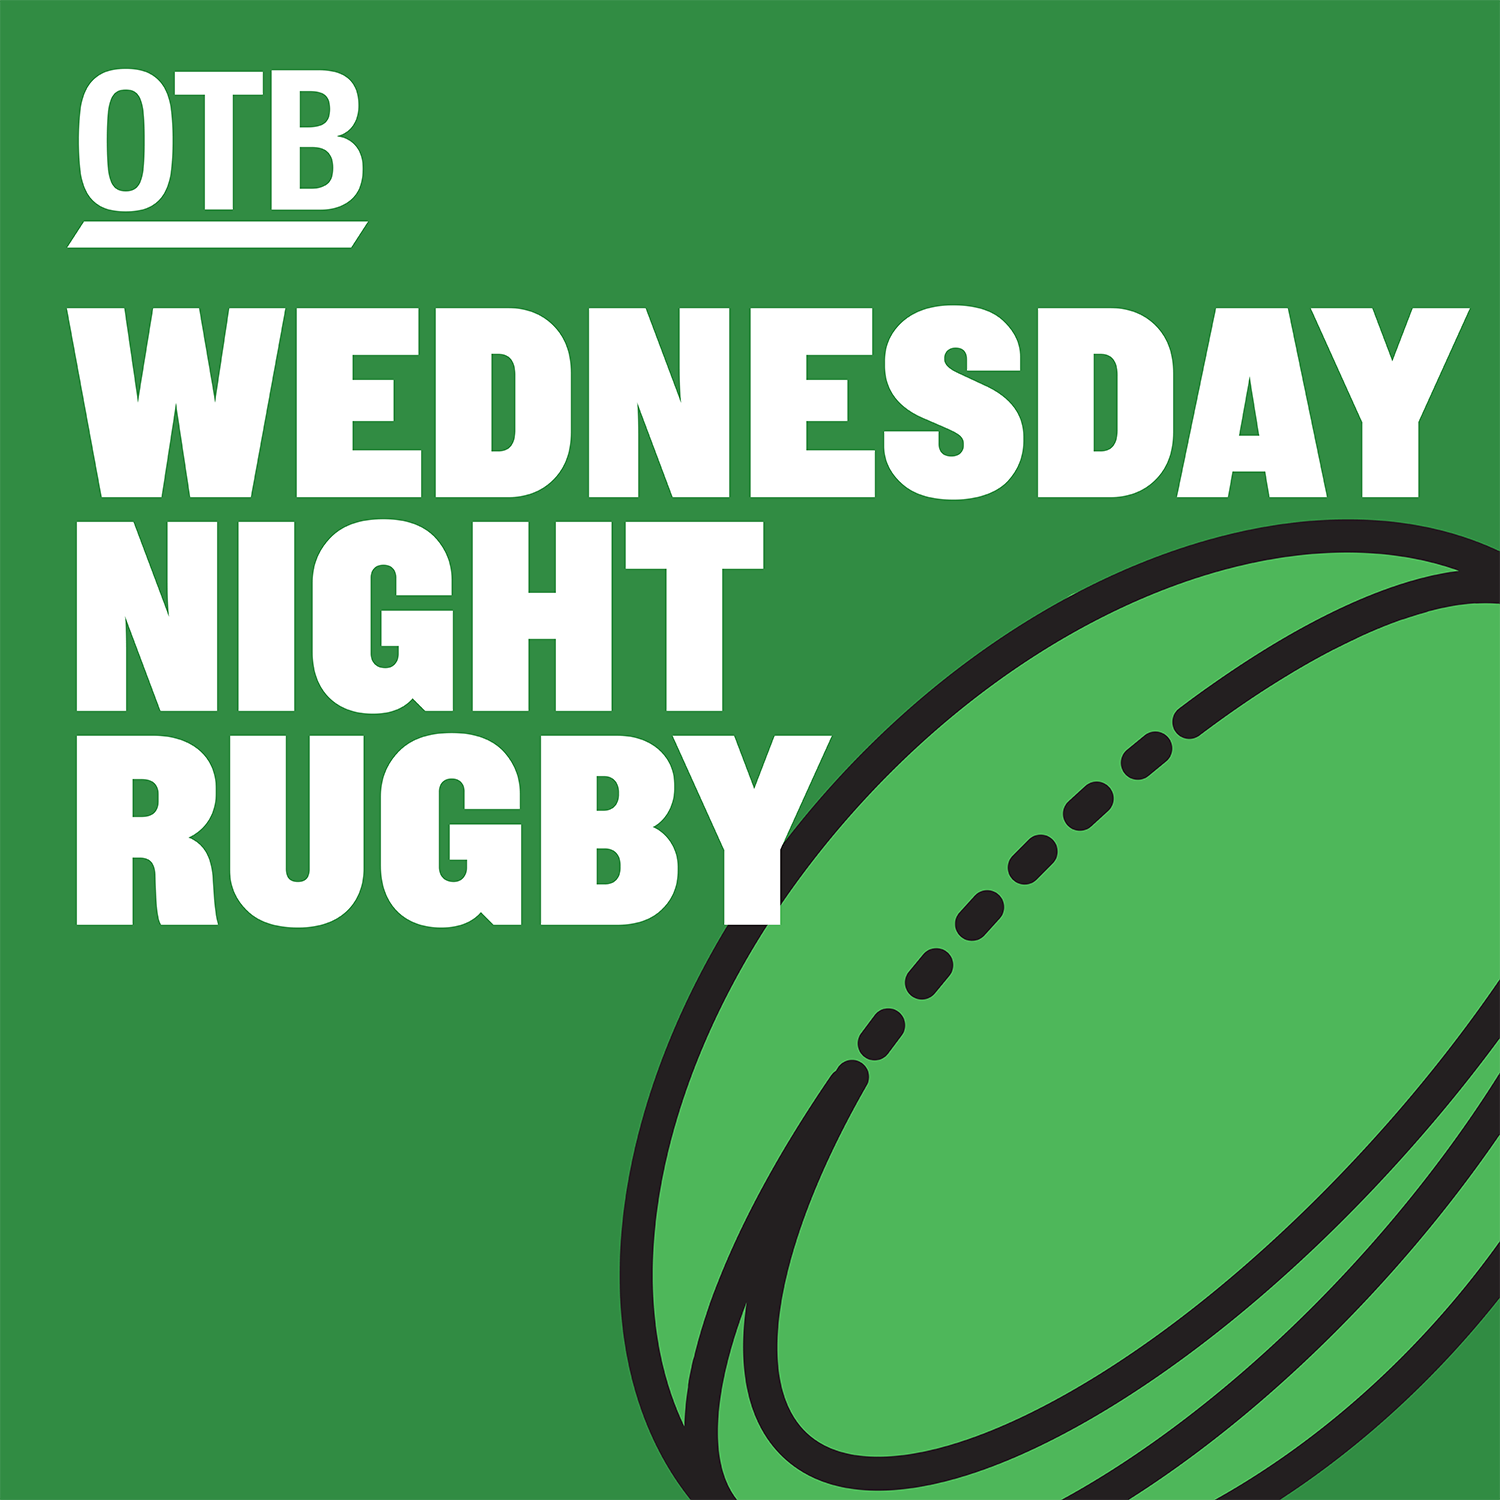 WEDNESDAY NIGHT RUGBY | South African dominance in Europe | Challenges facing women's game | GERRY THORNLEY